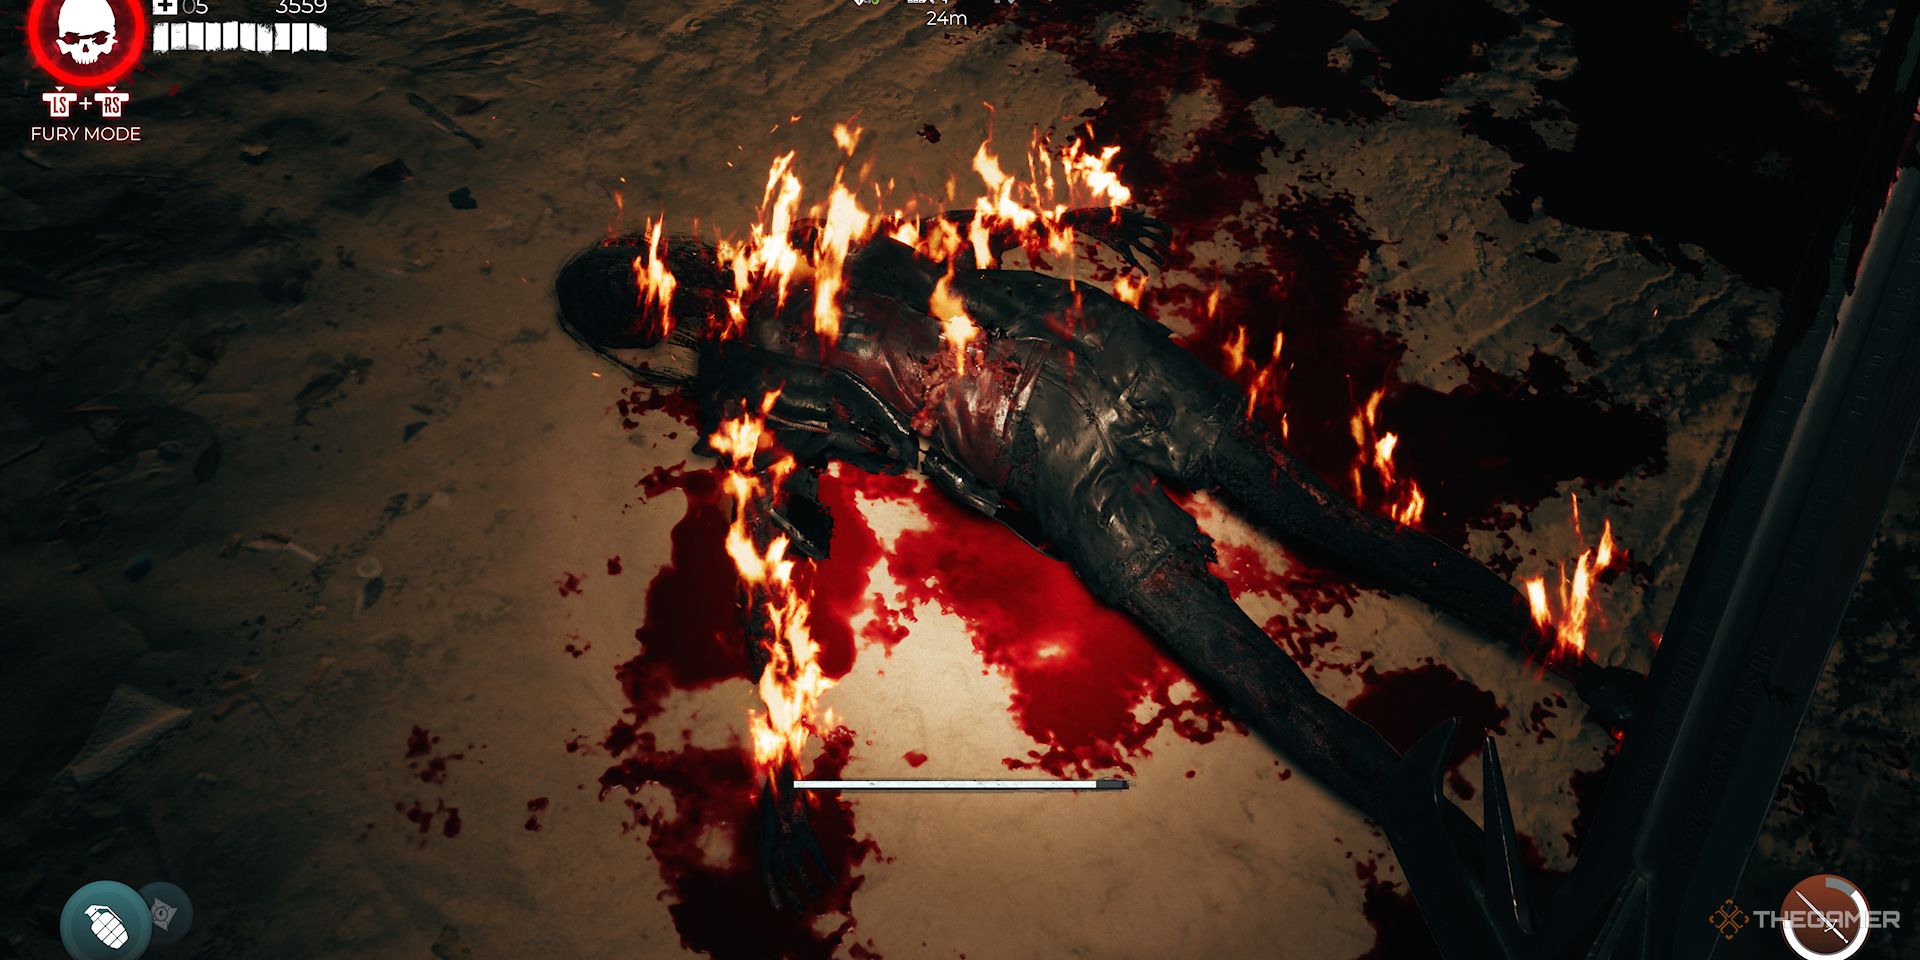 Image shows a burning zombie